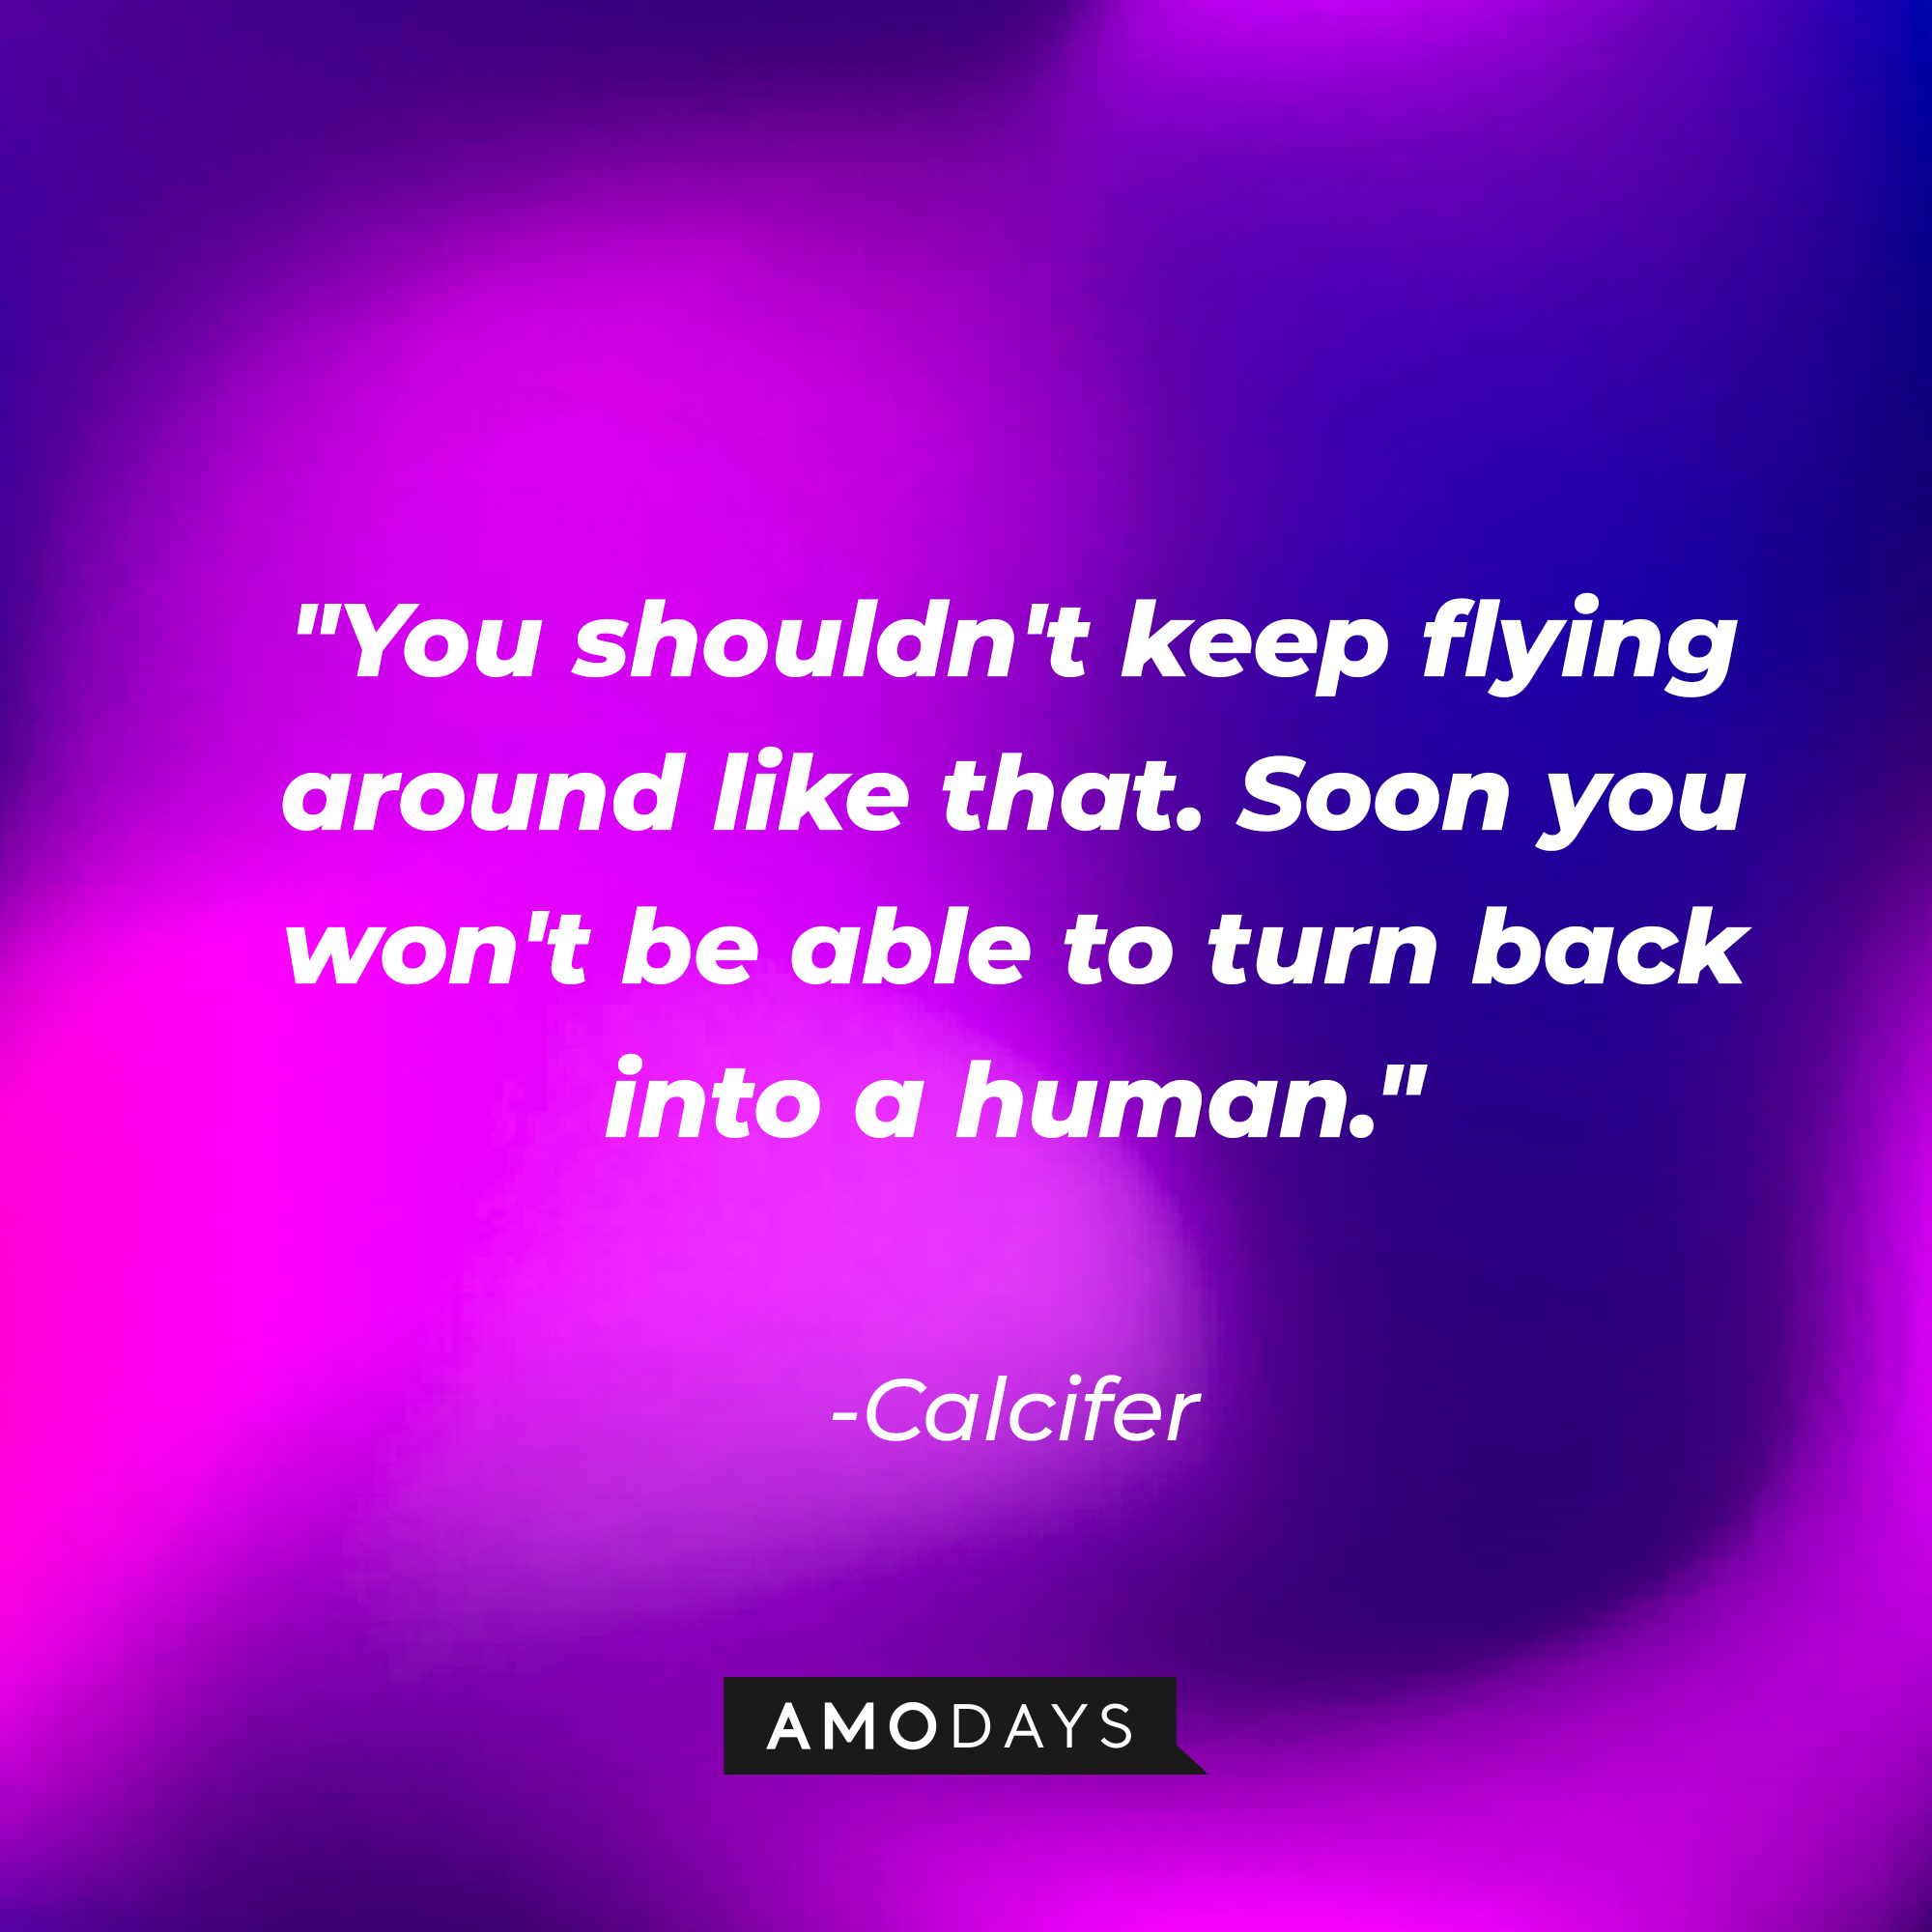 Calcifer's quote: "You shouldn't keep flying around like that. Soon you won't be able to turn back into a human." | Source: Amodays